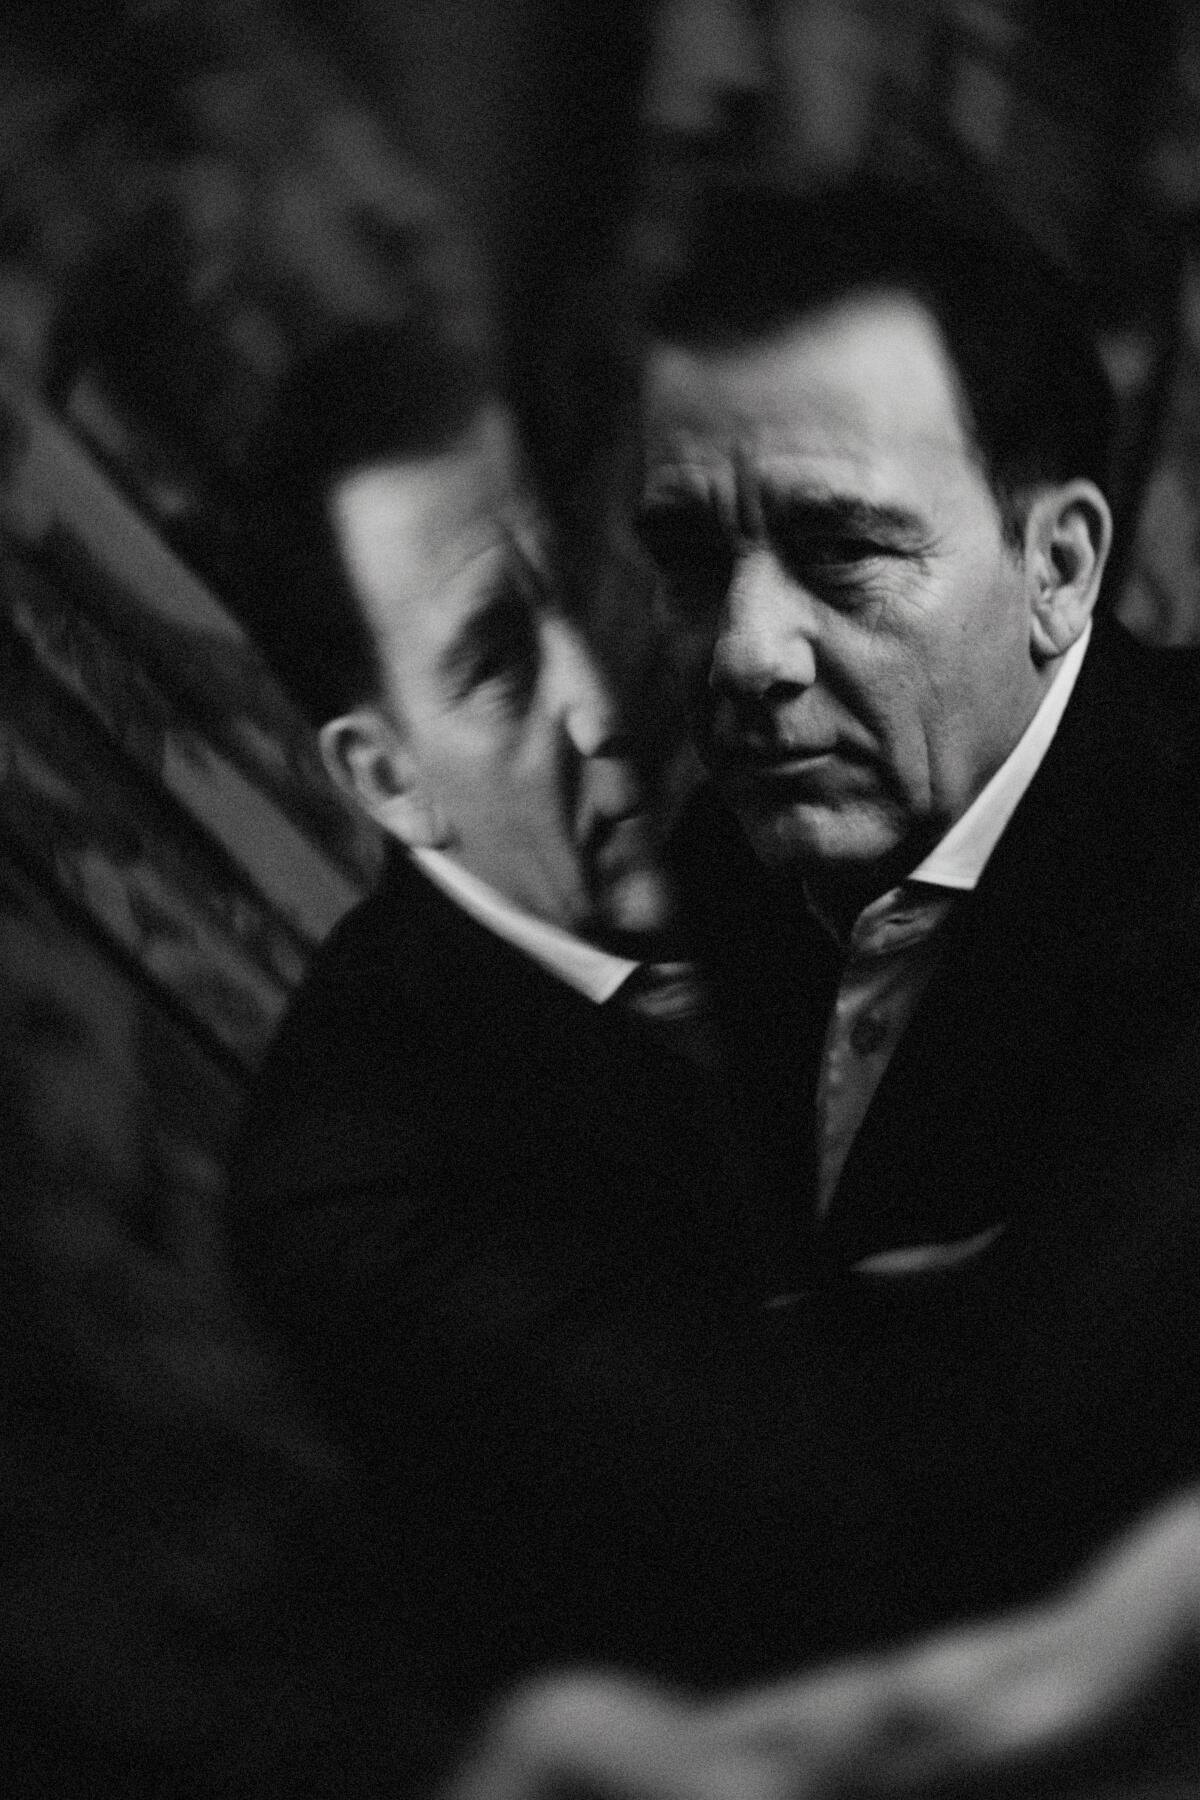 Clive Owen leaning against a reflection of himself.